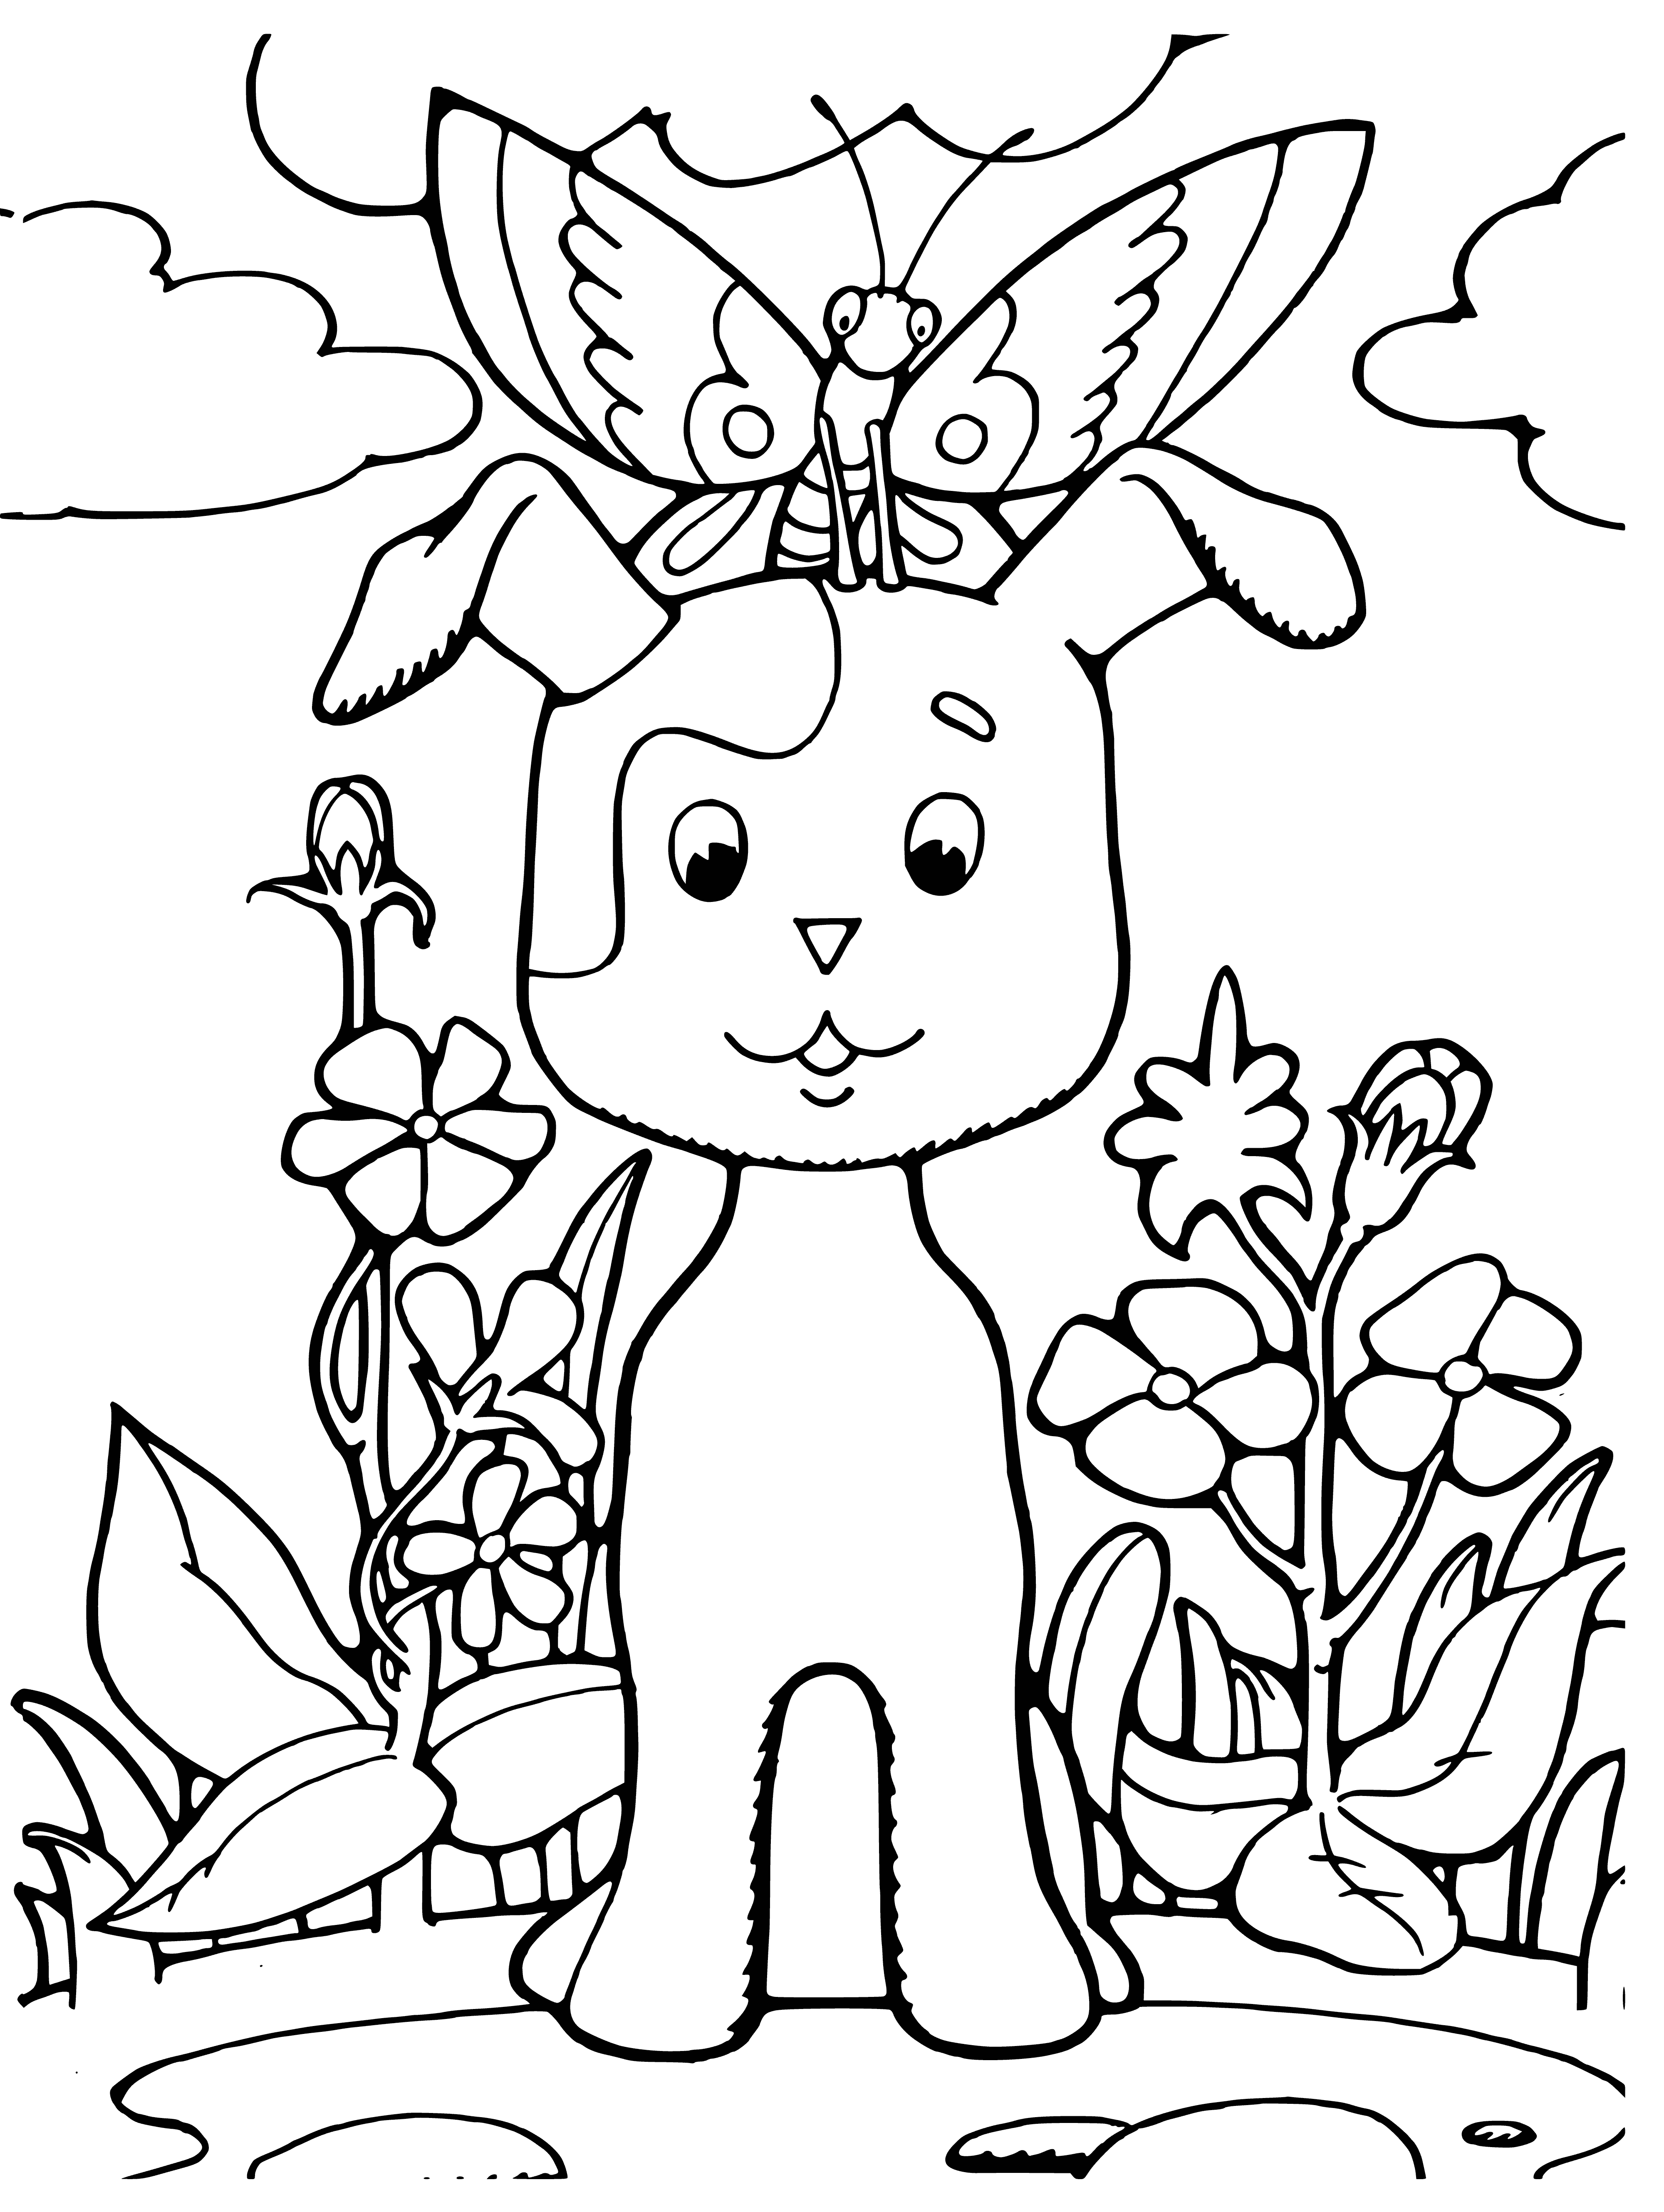 coloring page: A small, fluffy kitten with big blue eyes perches atop a purple ball, looking down with a yawn.